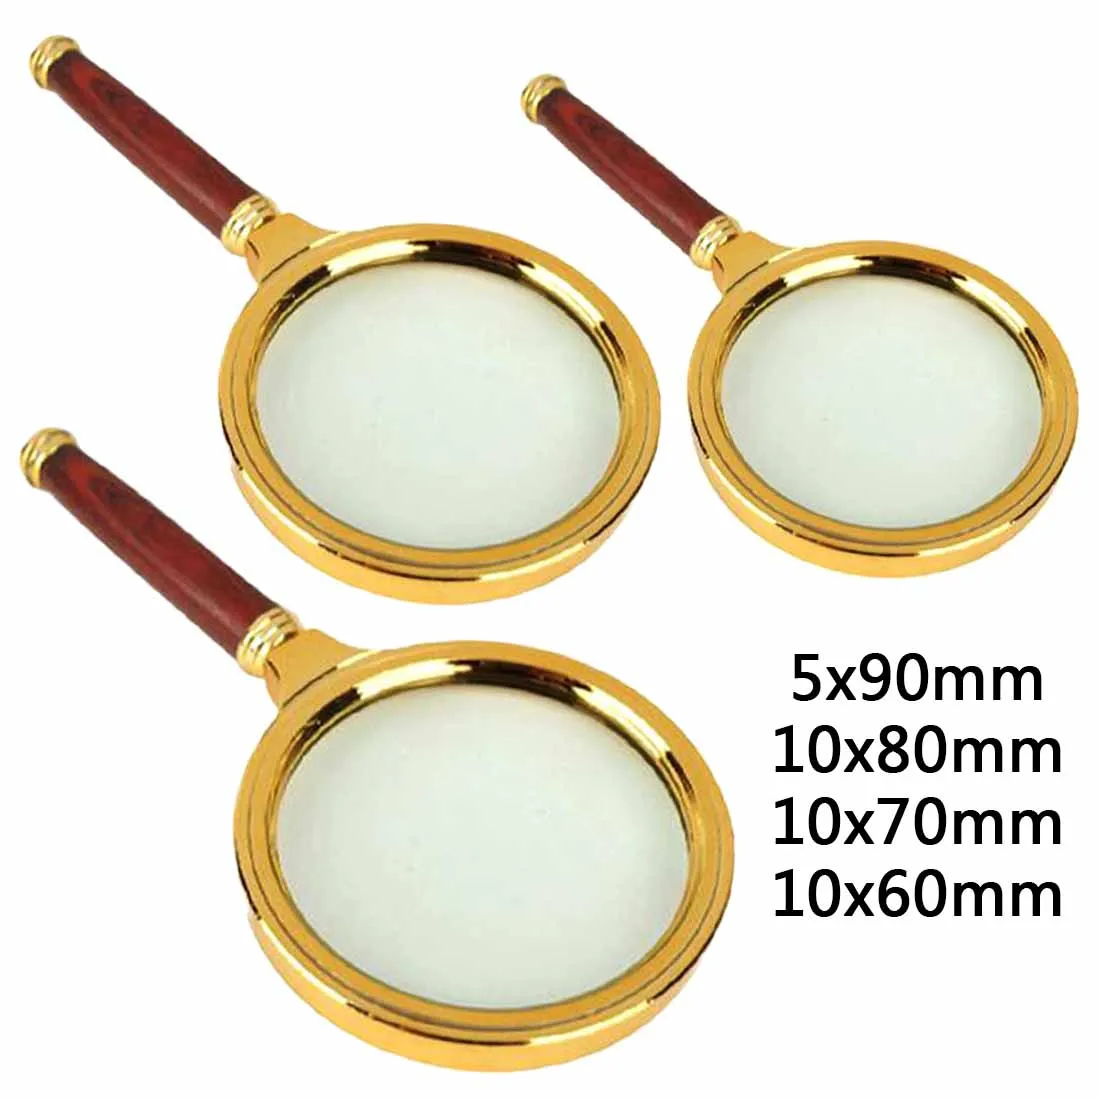 

Portable 90mm/80mm/70mm/60mm Handheld 5X/10X Magnifier Magnifying Glass Loupe Reading Jewelry Eye Loupe Magnifier Repair Tool